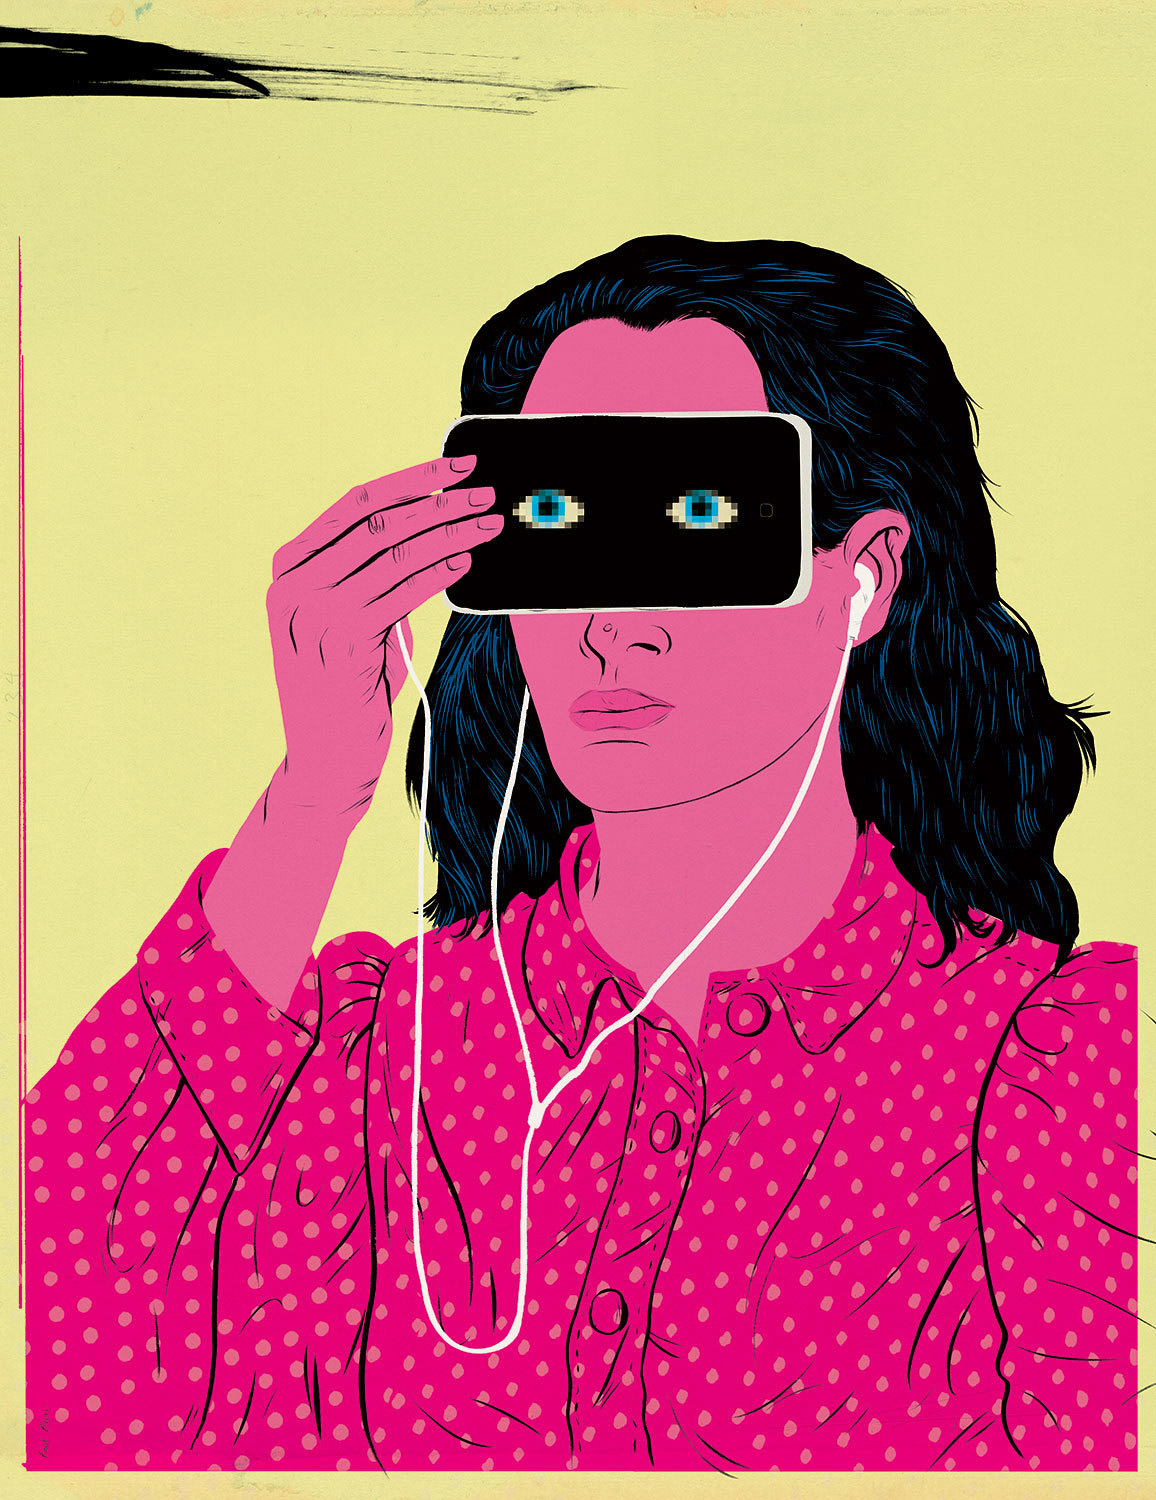 An illustration of a person wearing headphones with a phone covering their eyes, but the eyes are visible through the screen.